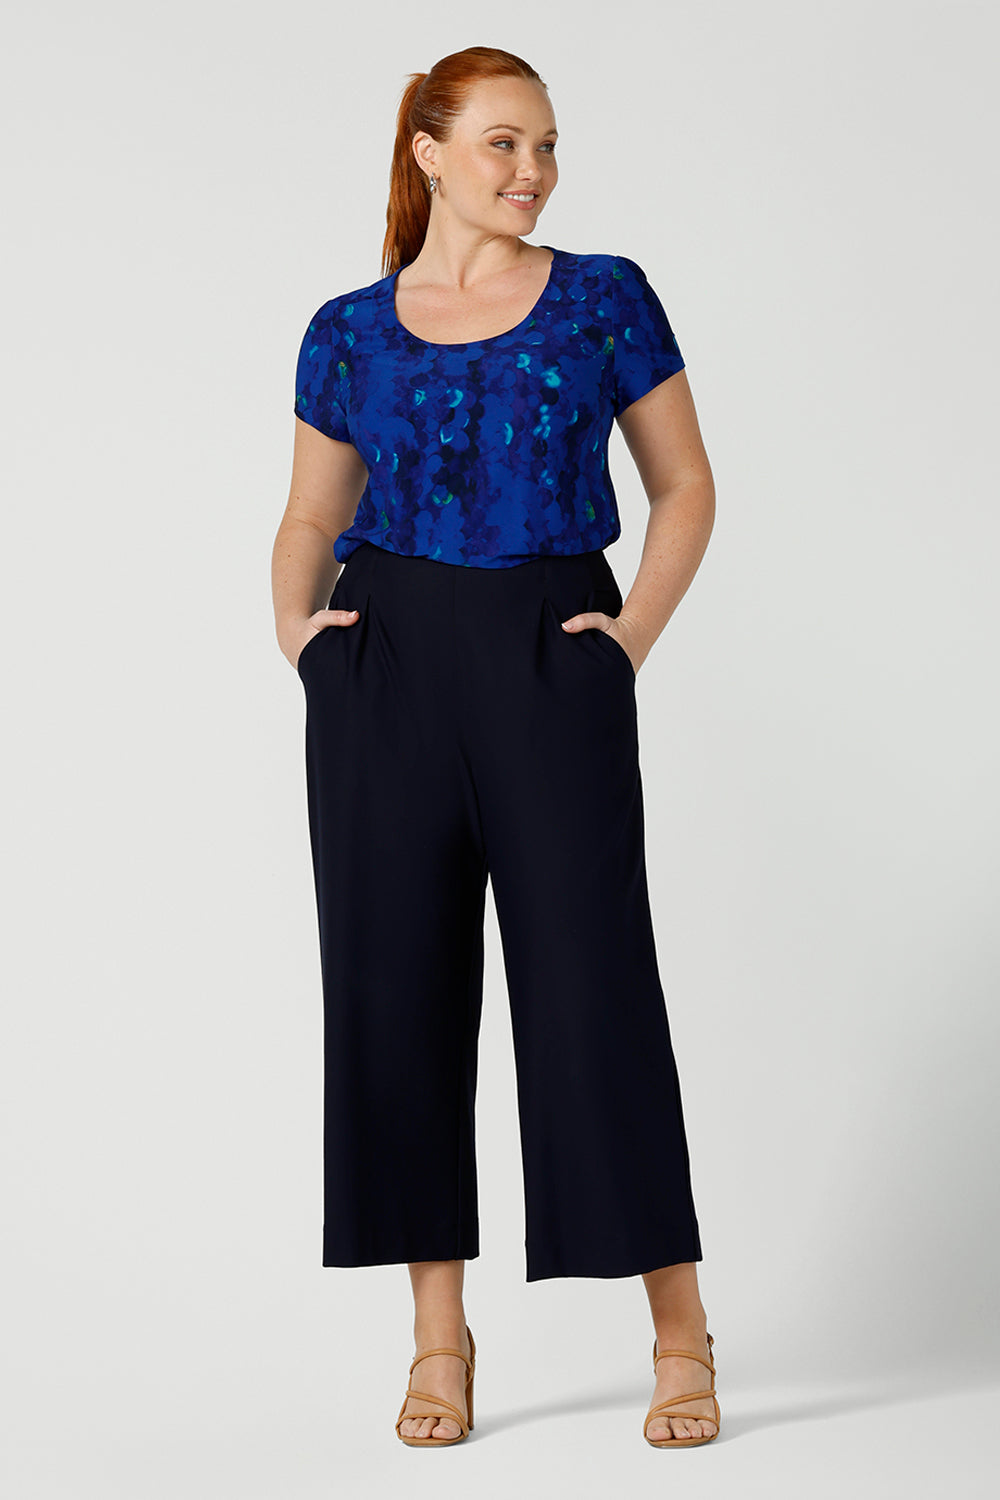 A curvy, size 12 woman wearing a cobalt abstract jersey print, Round neck top with short sleeves with navy wide leg pants. A good top for summer casual wear, or style tucked as a workwear top. Shop made in Australia tops in petite to plus sizes online at Australian fashion brand, Leina & Fleur.